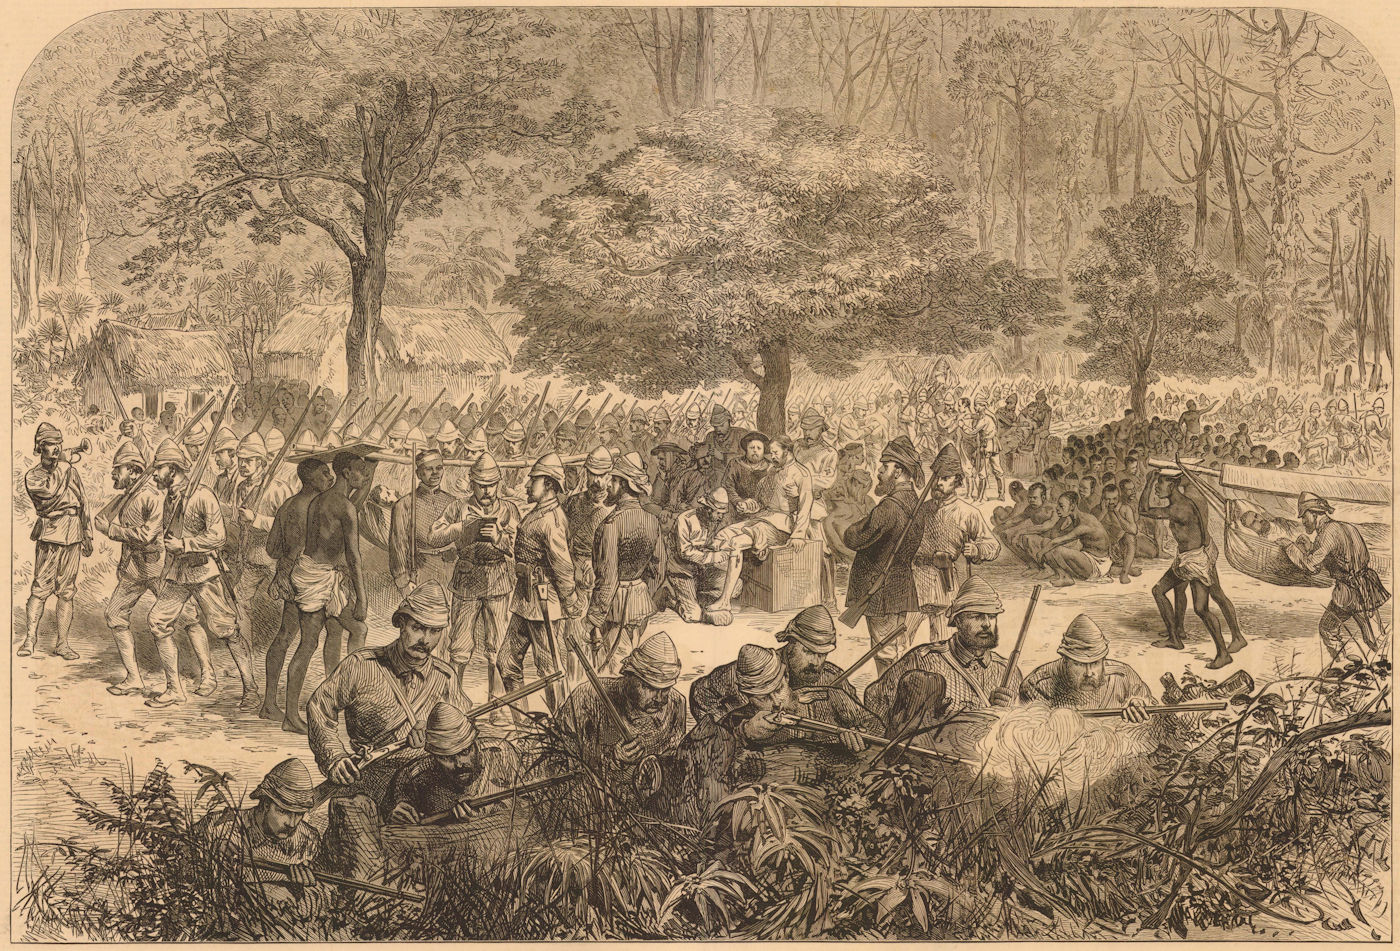 Associate Product The Third Anglo-Ashanti War: Headquarters at the Battle of Amoaful. Ghana 1874